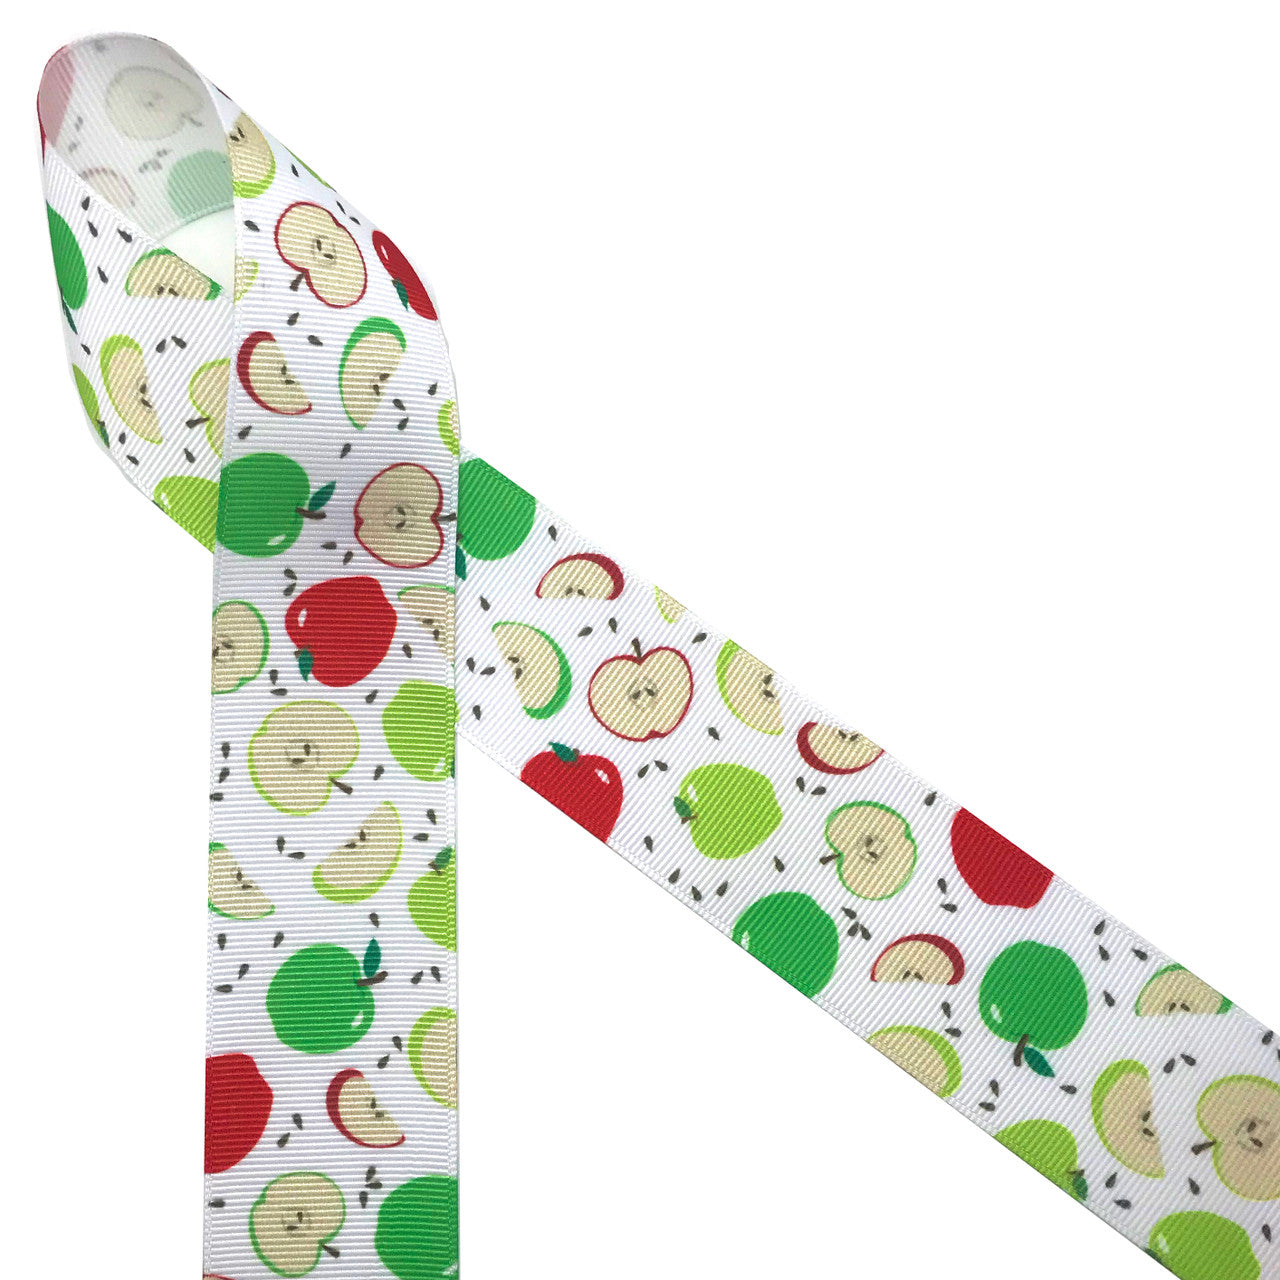 Green and red apples with brown seeds and apple slices printed on 1.5" white grosgrain ribbon is such a fun ribbon for Fall crafting! A great choice for hair bows, scrap booking and more! Designed and printed in the USA